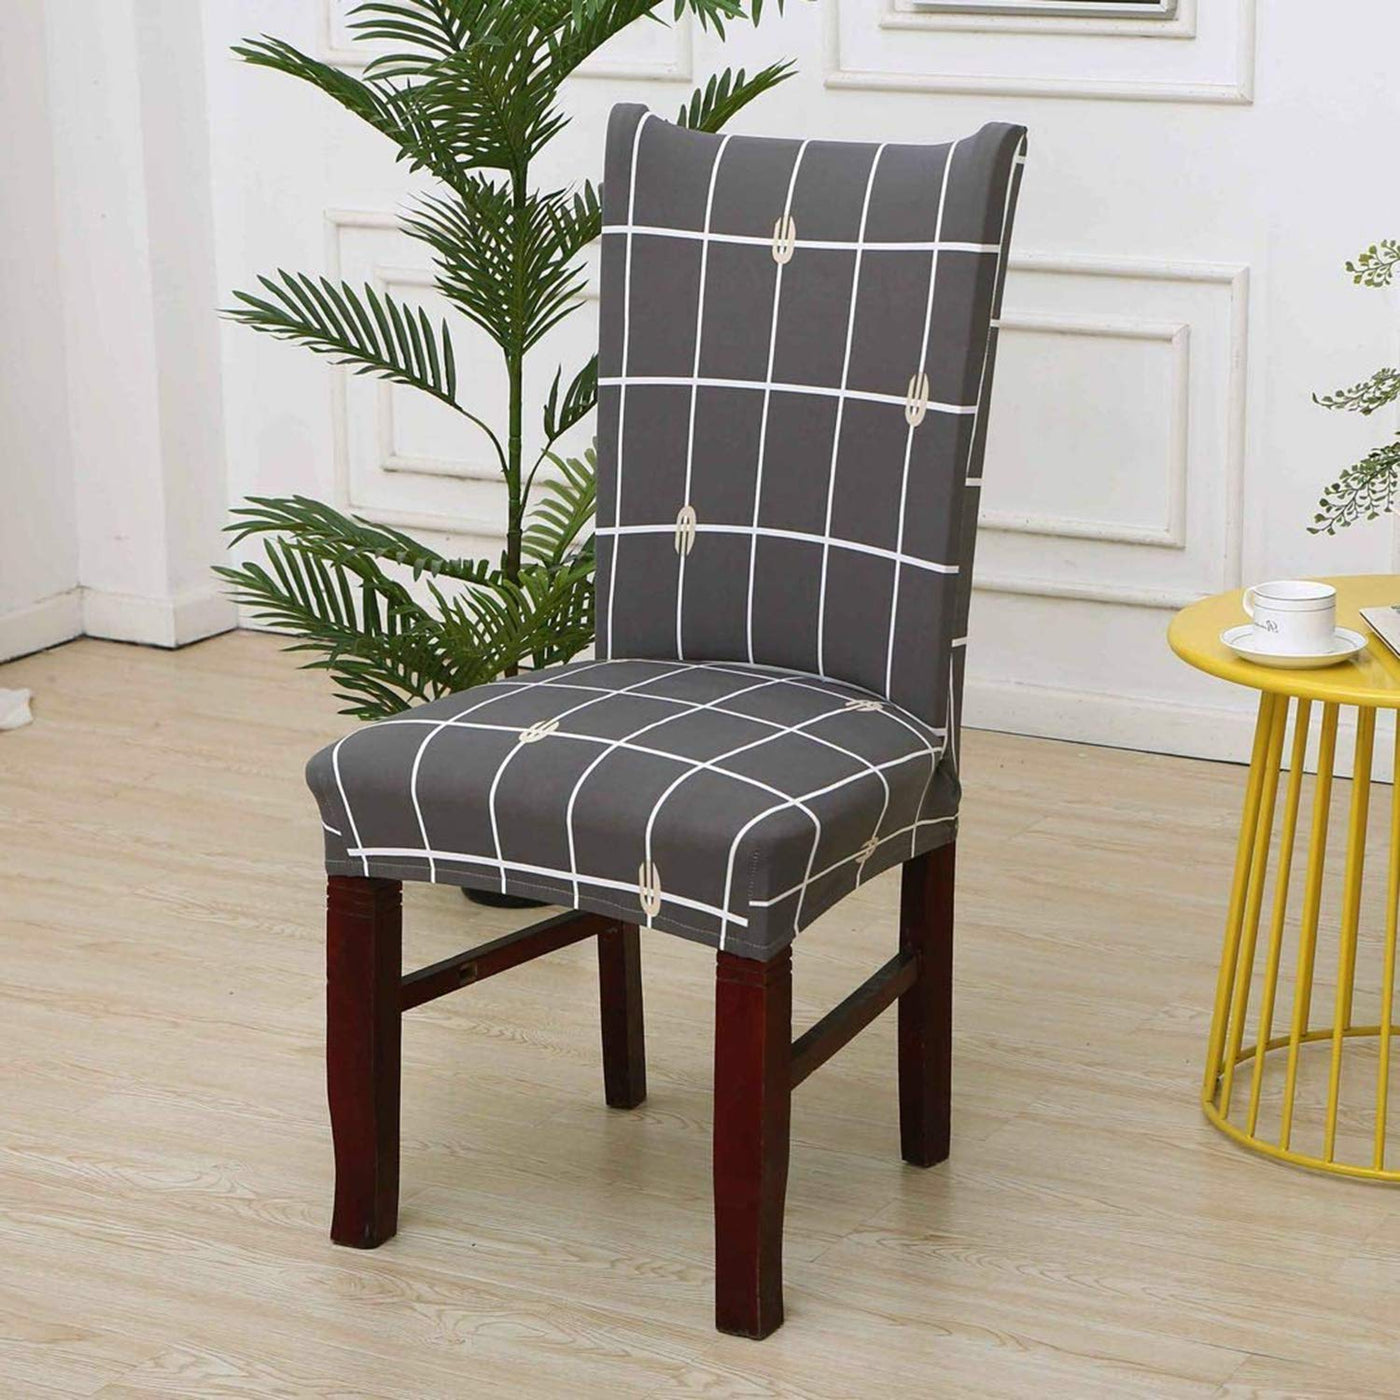 Premium Chair Cover - Stretchable & Elastic Fitted Great Happy IN Grey Check 2 PCS - ₹799 